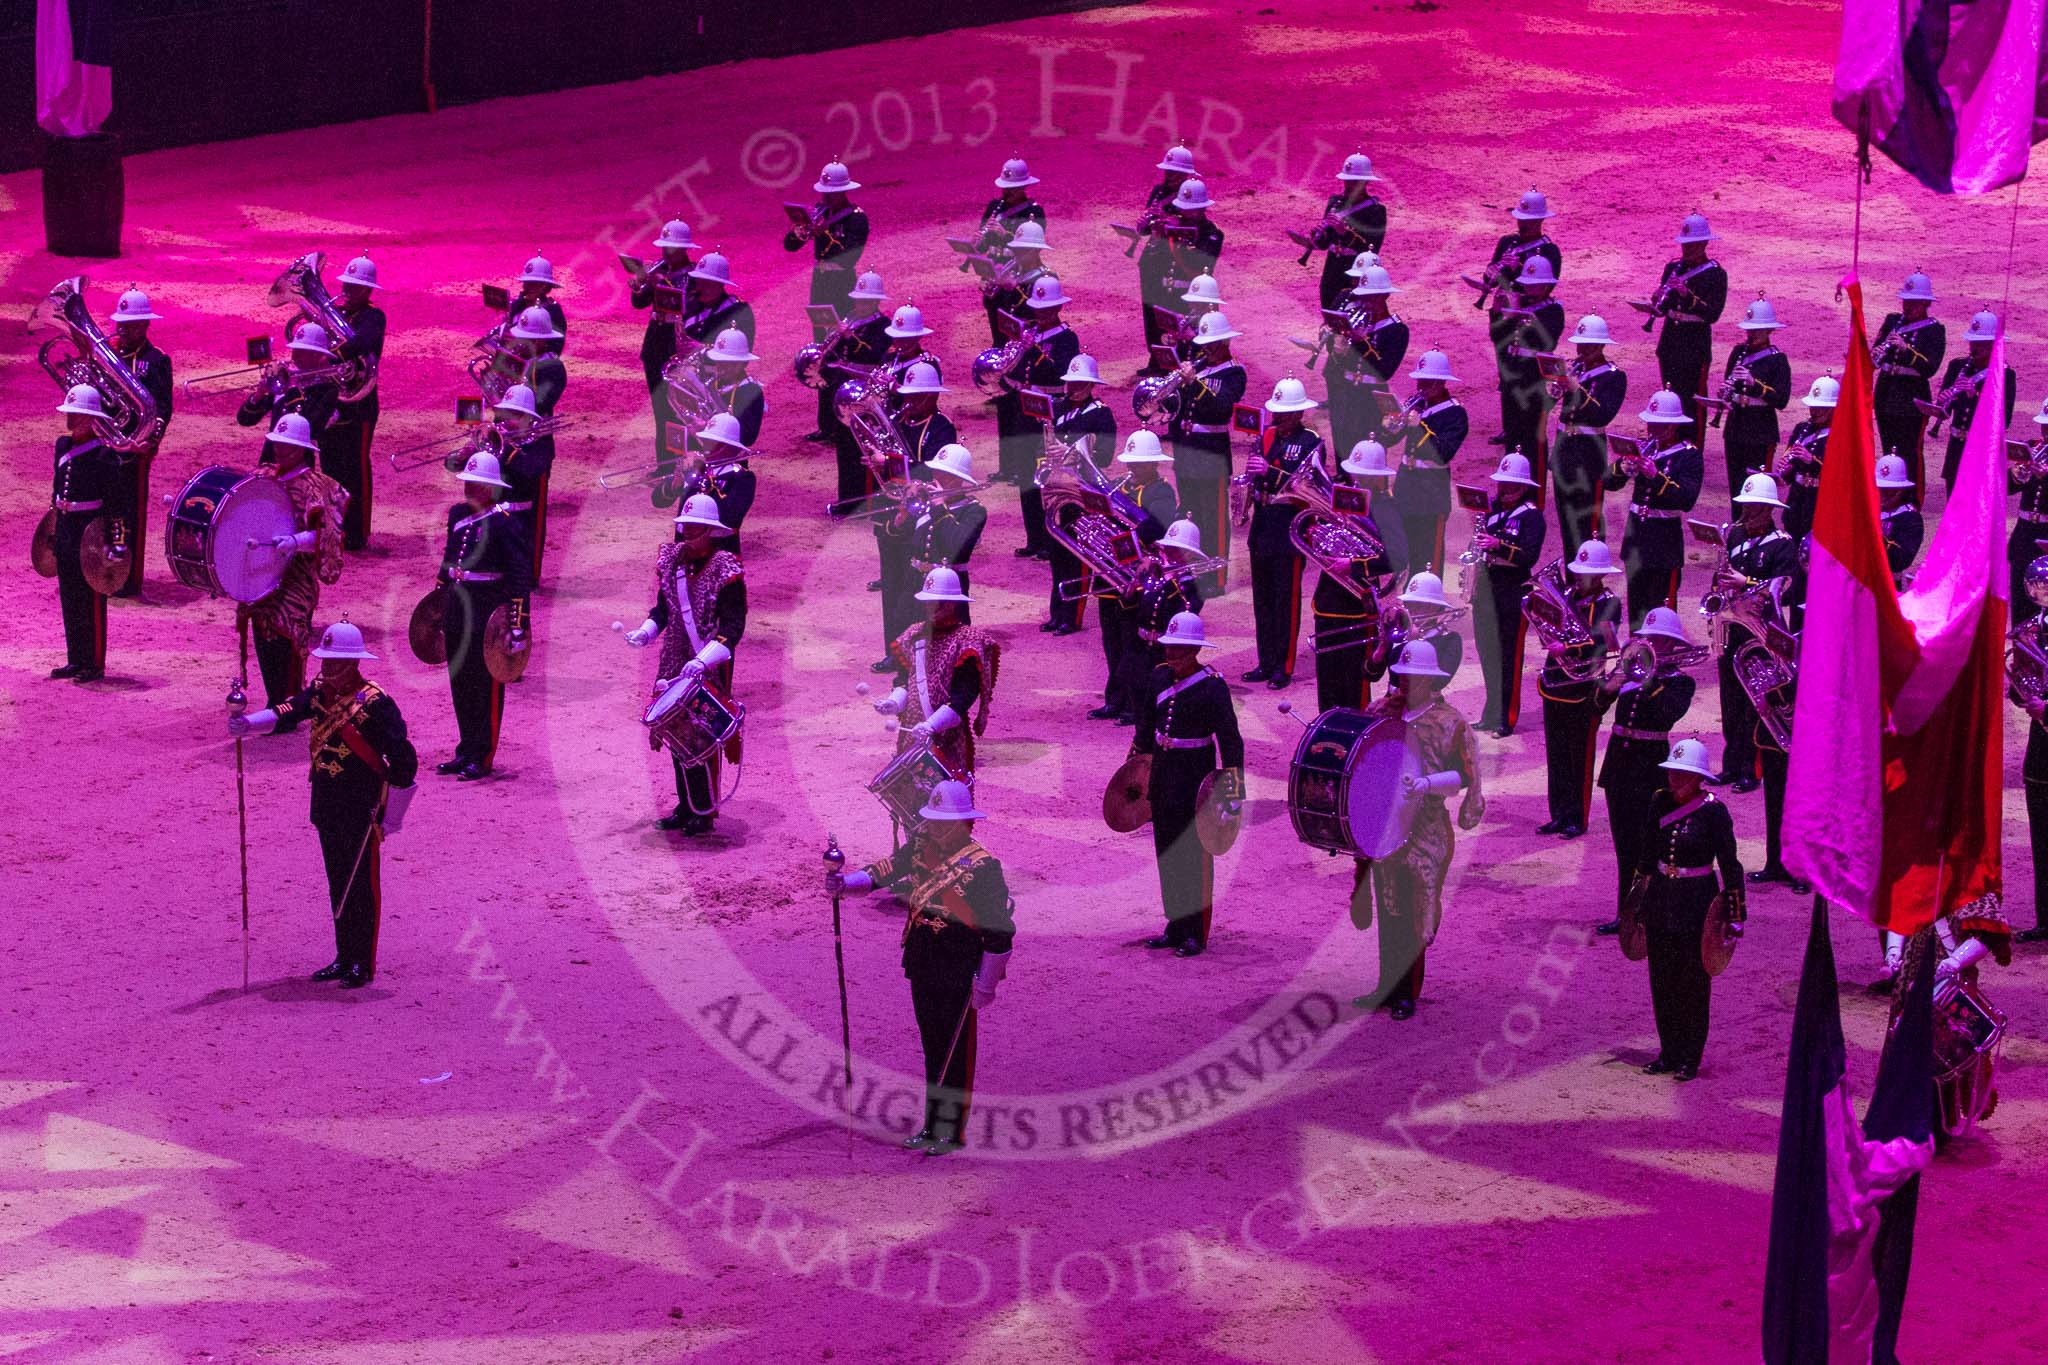 British Military Tournament 2013: The Royal Marines Massed Band..
Earls Court,
London SW5,

United Kingdom,
on 06 December 2013 at 14:56, image #63